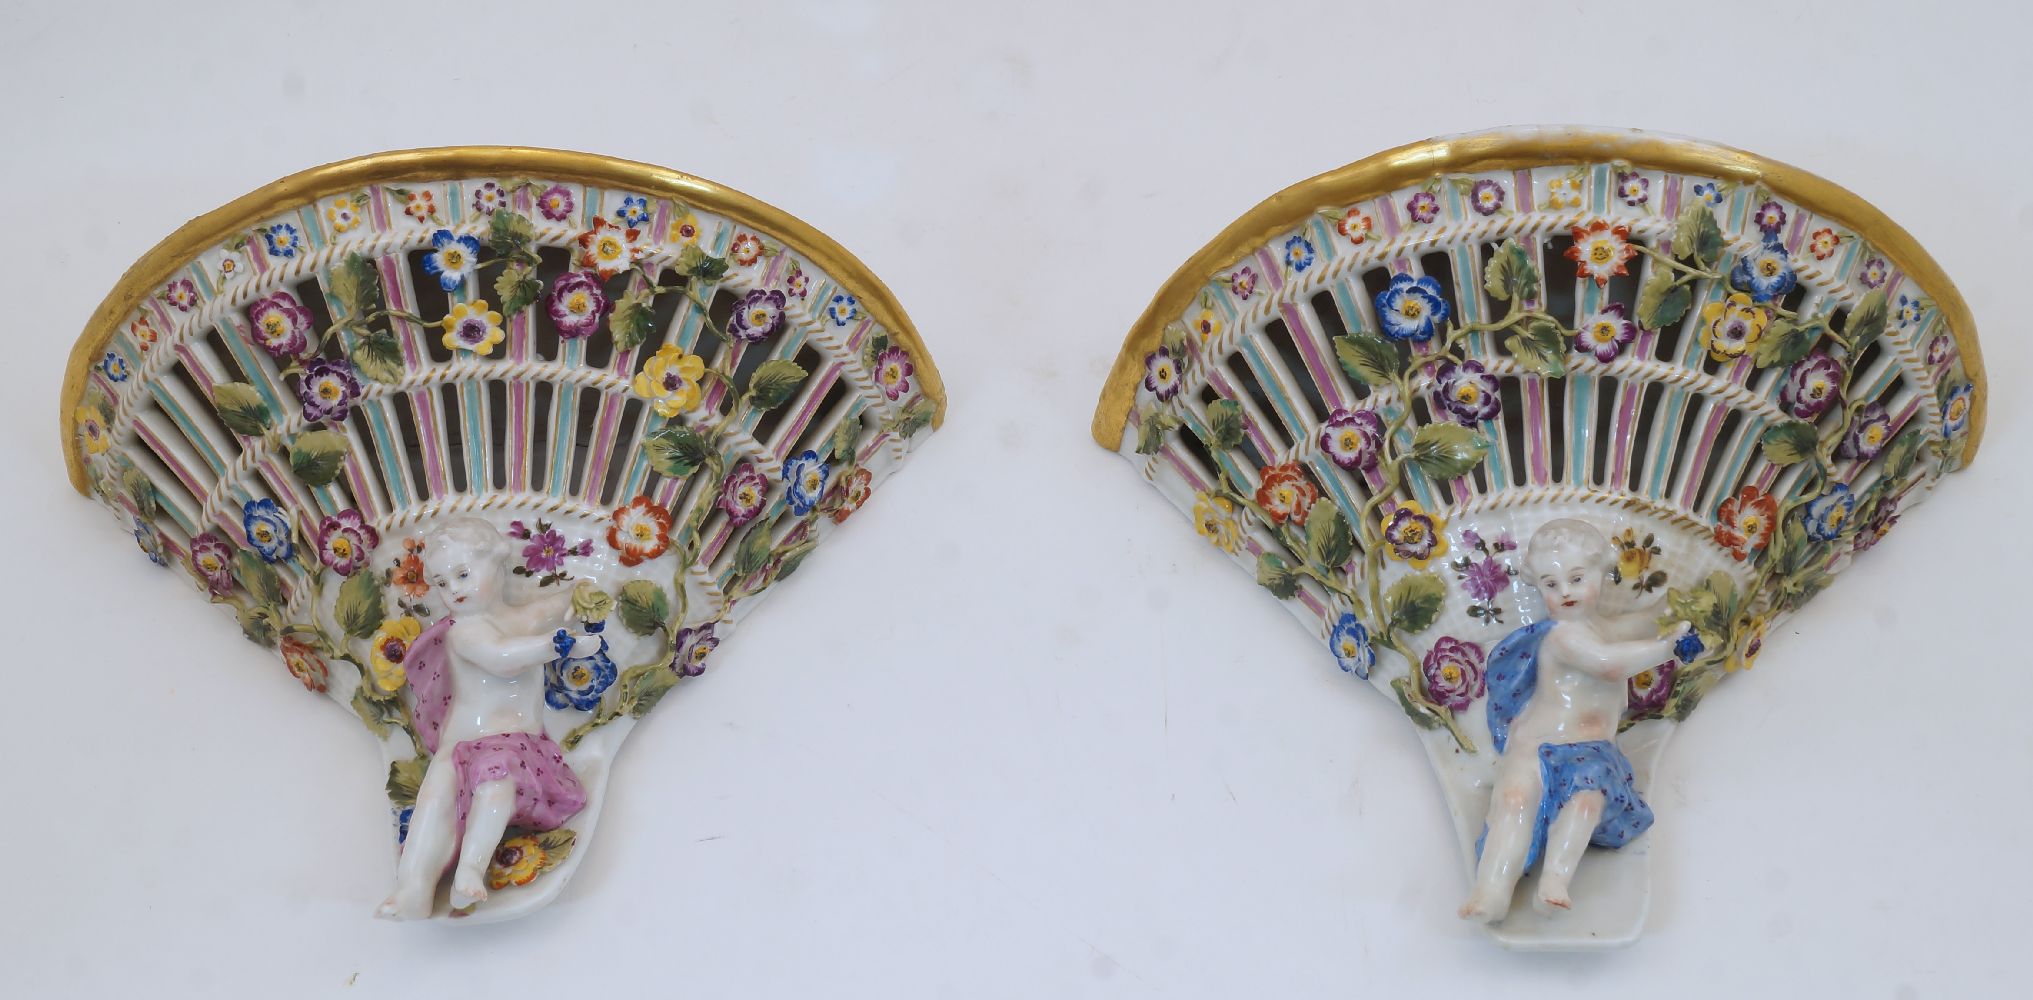 A pair of Dresden wall brackets, early 20th century, of pierced trellis design with encrusted